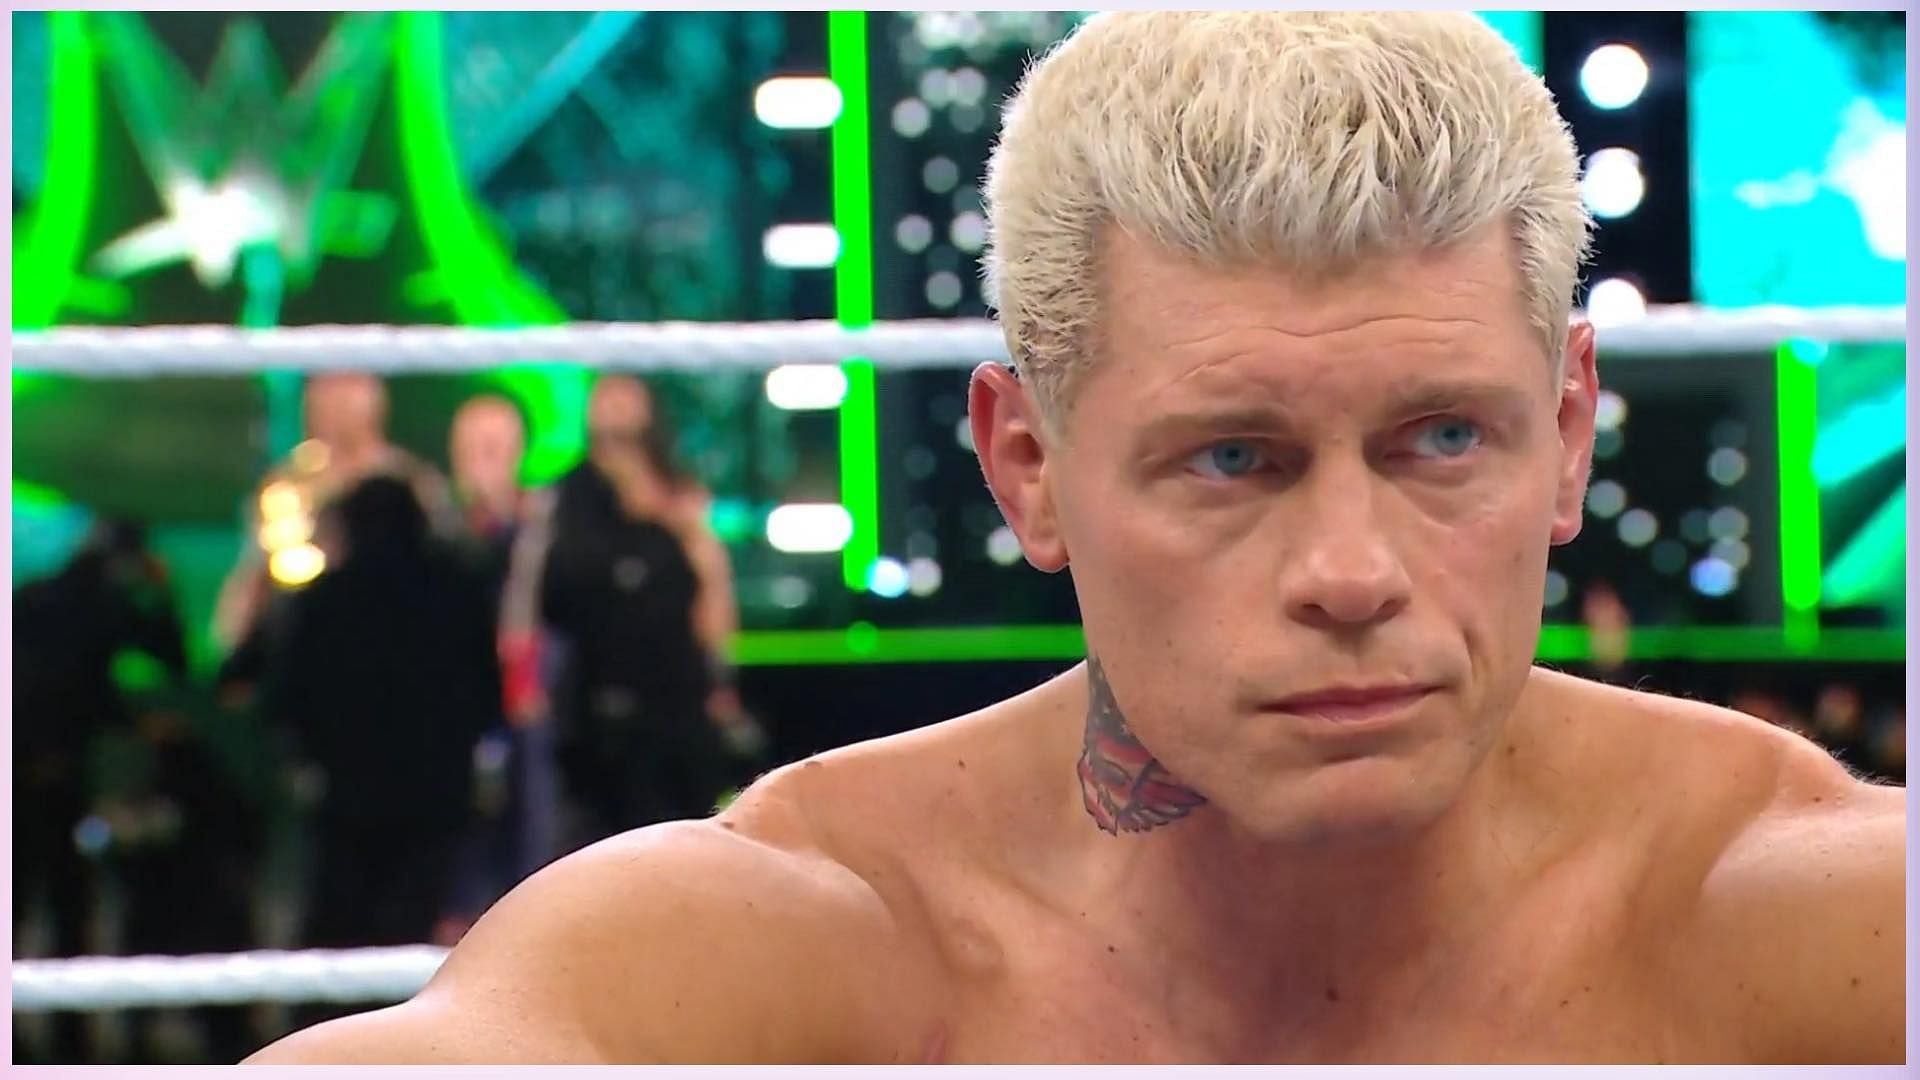 What is next for Cody Rhodes in WWE?